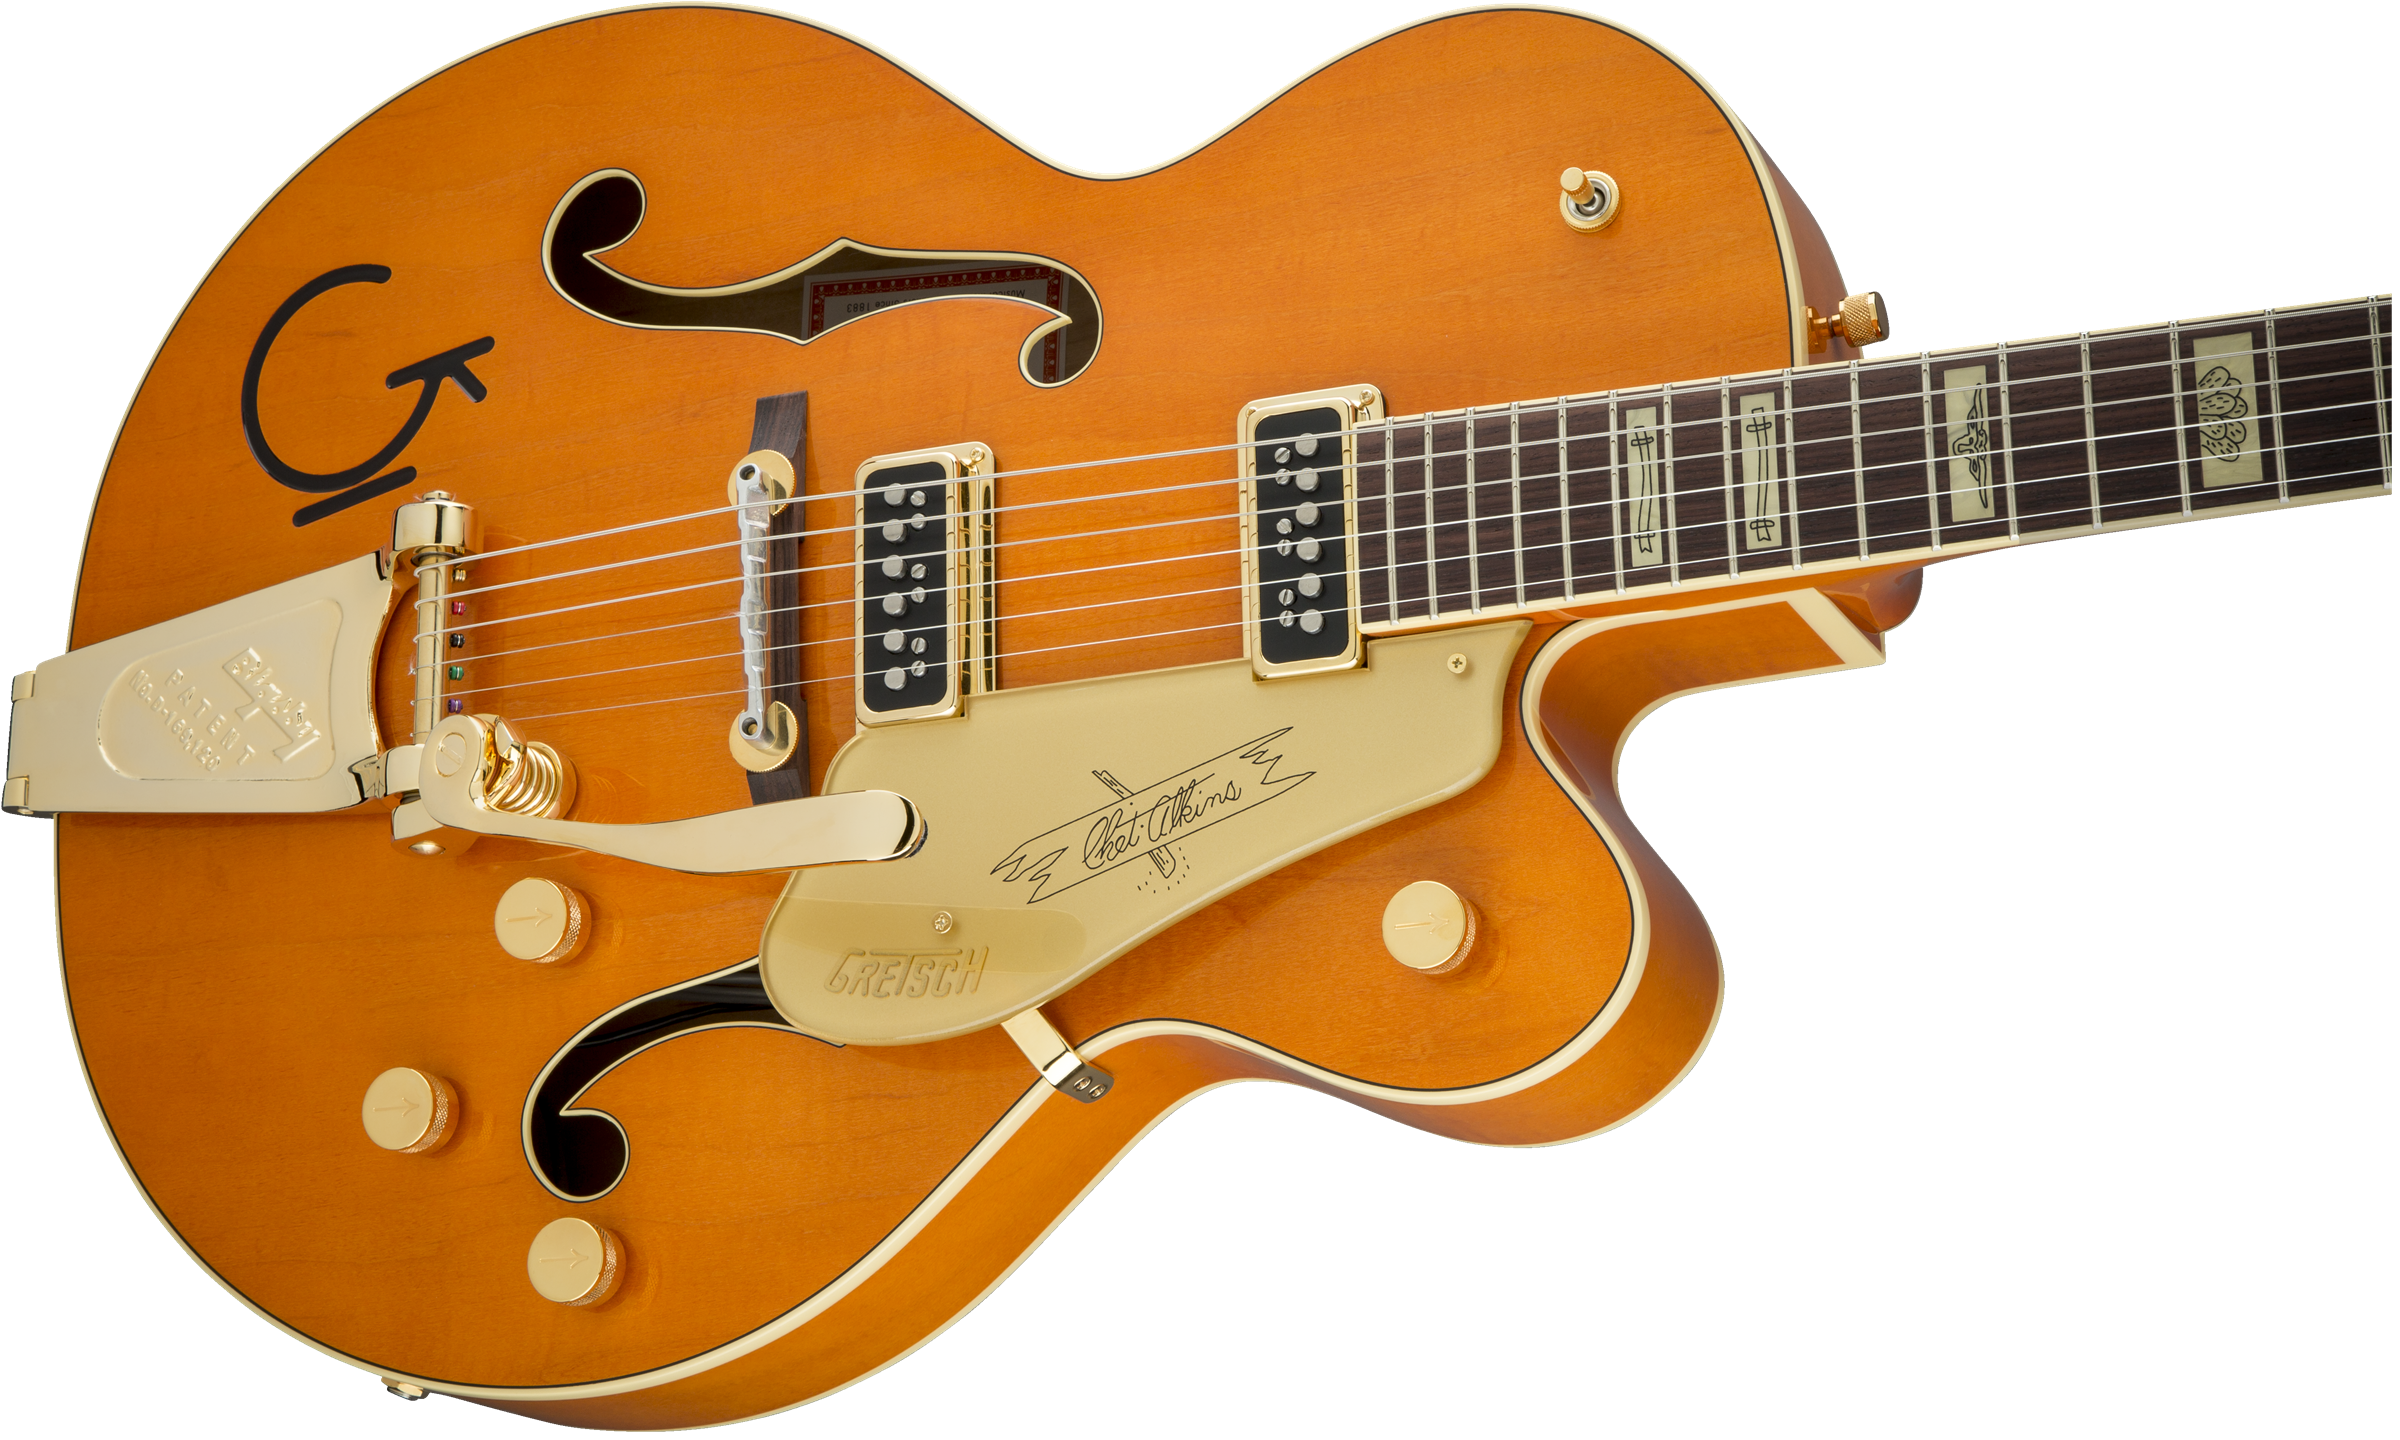 Gretsch G6120T-55GE Golden Era Edition 1955 Chet Atkins Hollow Body with Bigsby, TV Jones, Vintage Orange Stain, Lacquer 2401357822